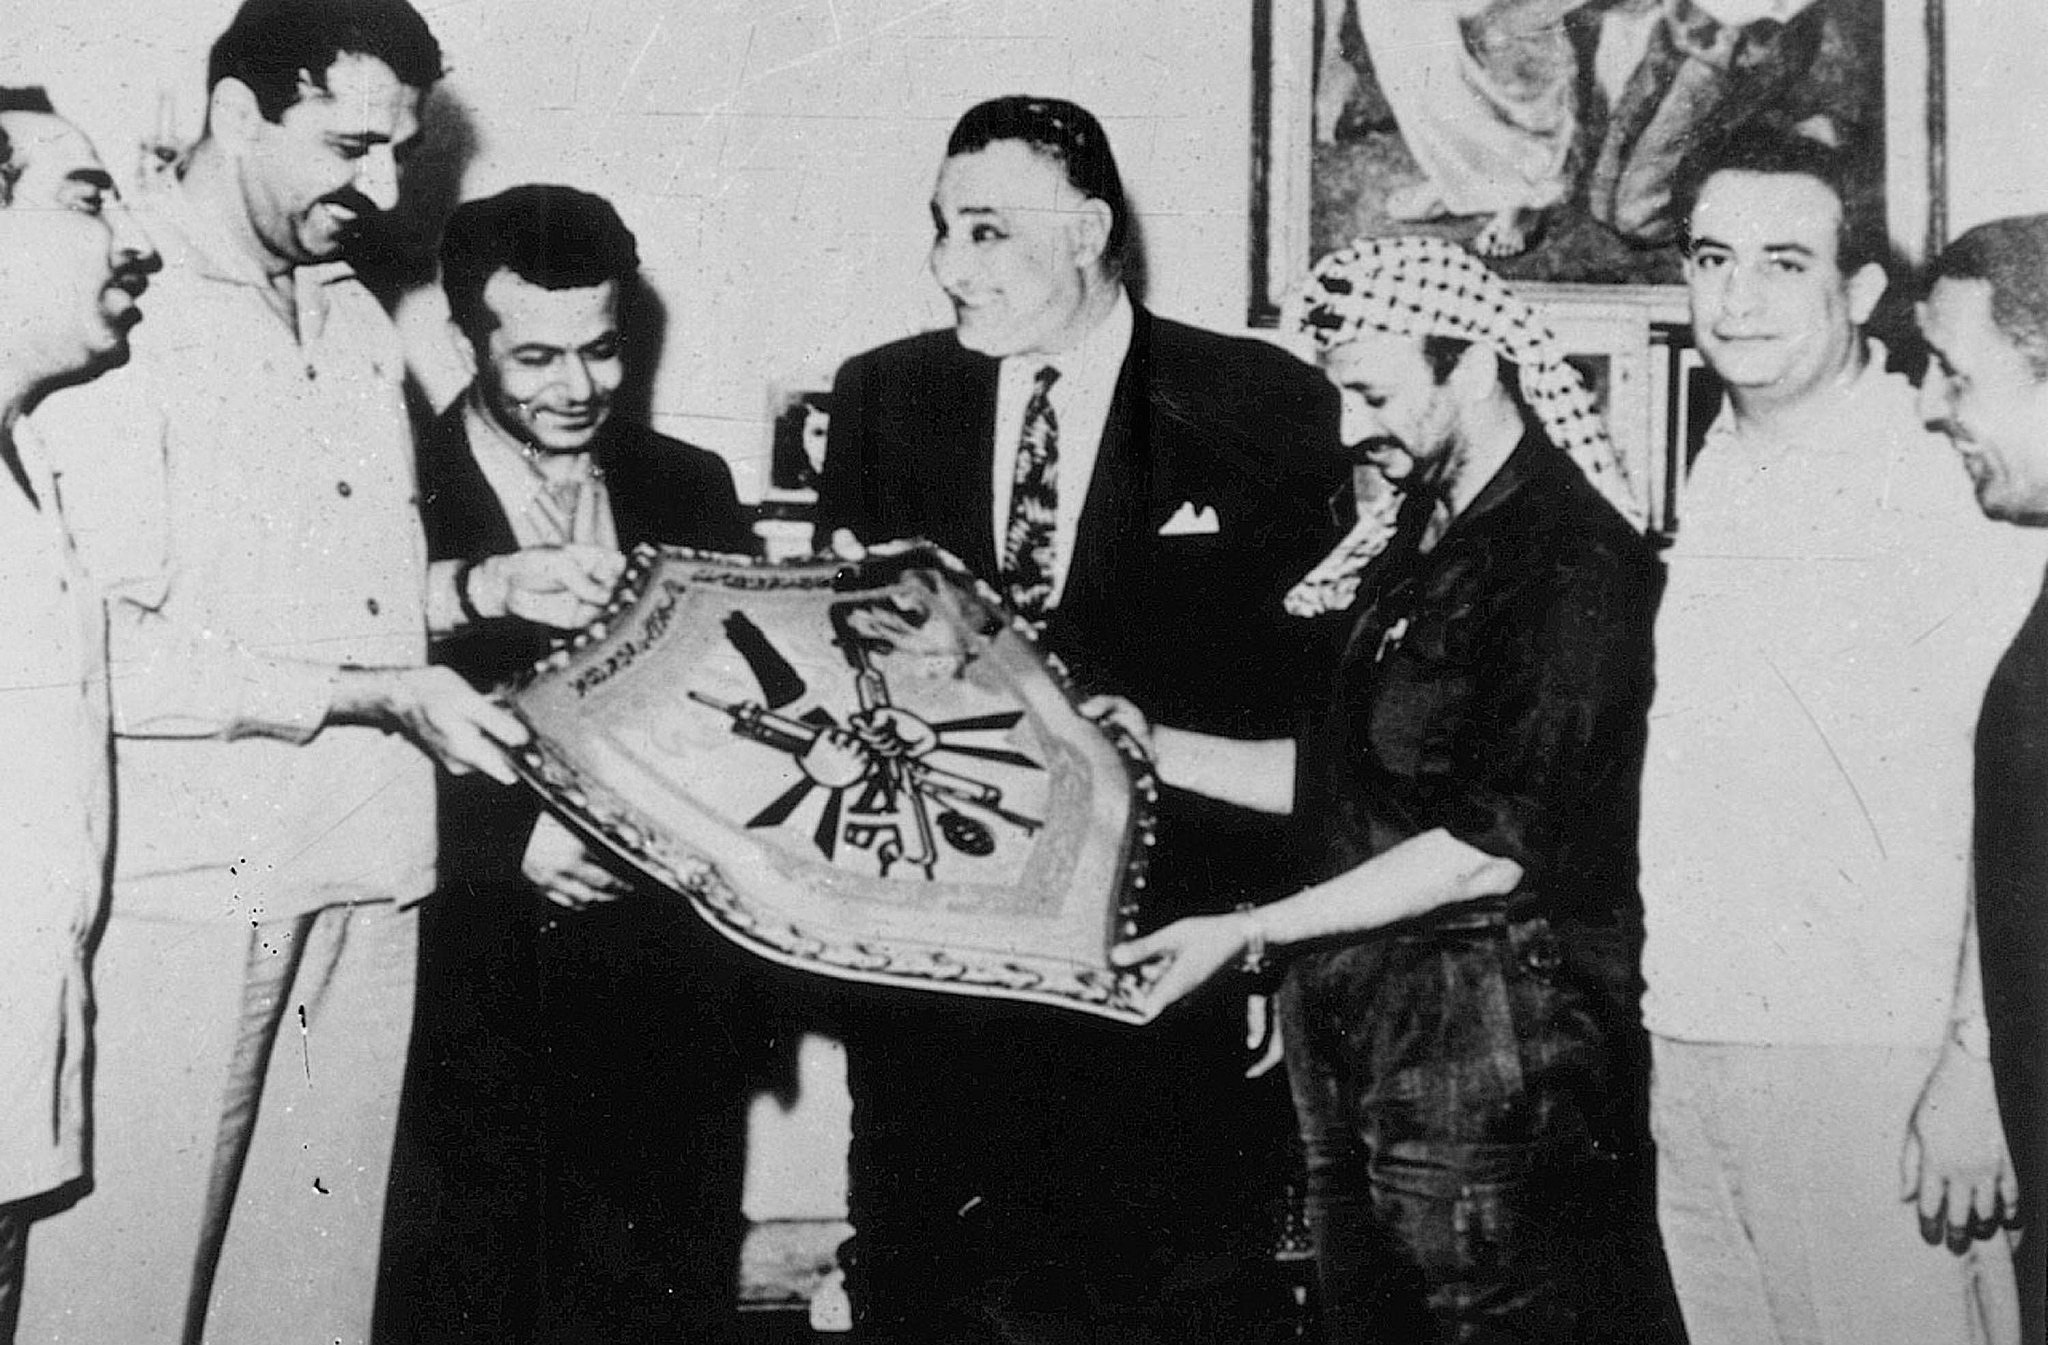 In this undated handout from the Palestinian Authority, PLO leader Yasser Arafat seen with Egyptian President Gamal Abdel Nasser in Egypt. (Palestinian Authorities via Abed Rahim Khatib/Flash90)